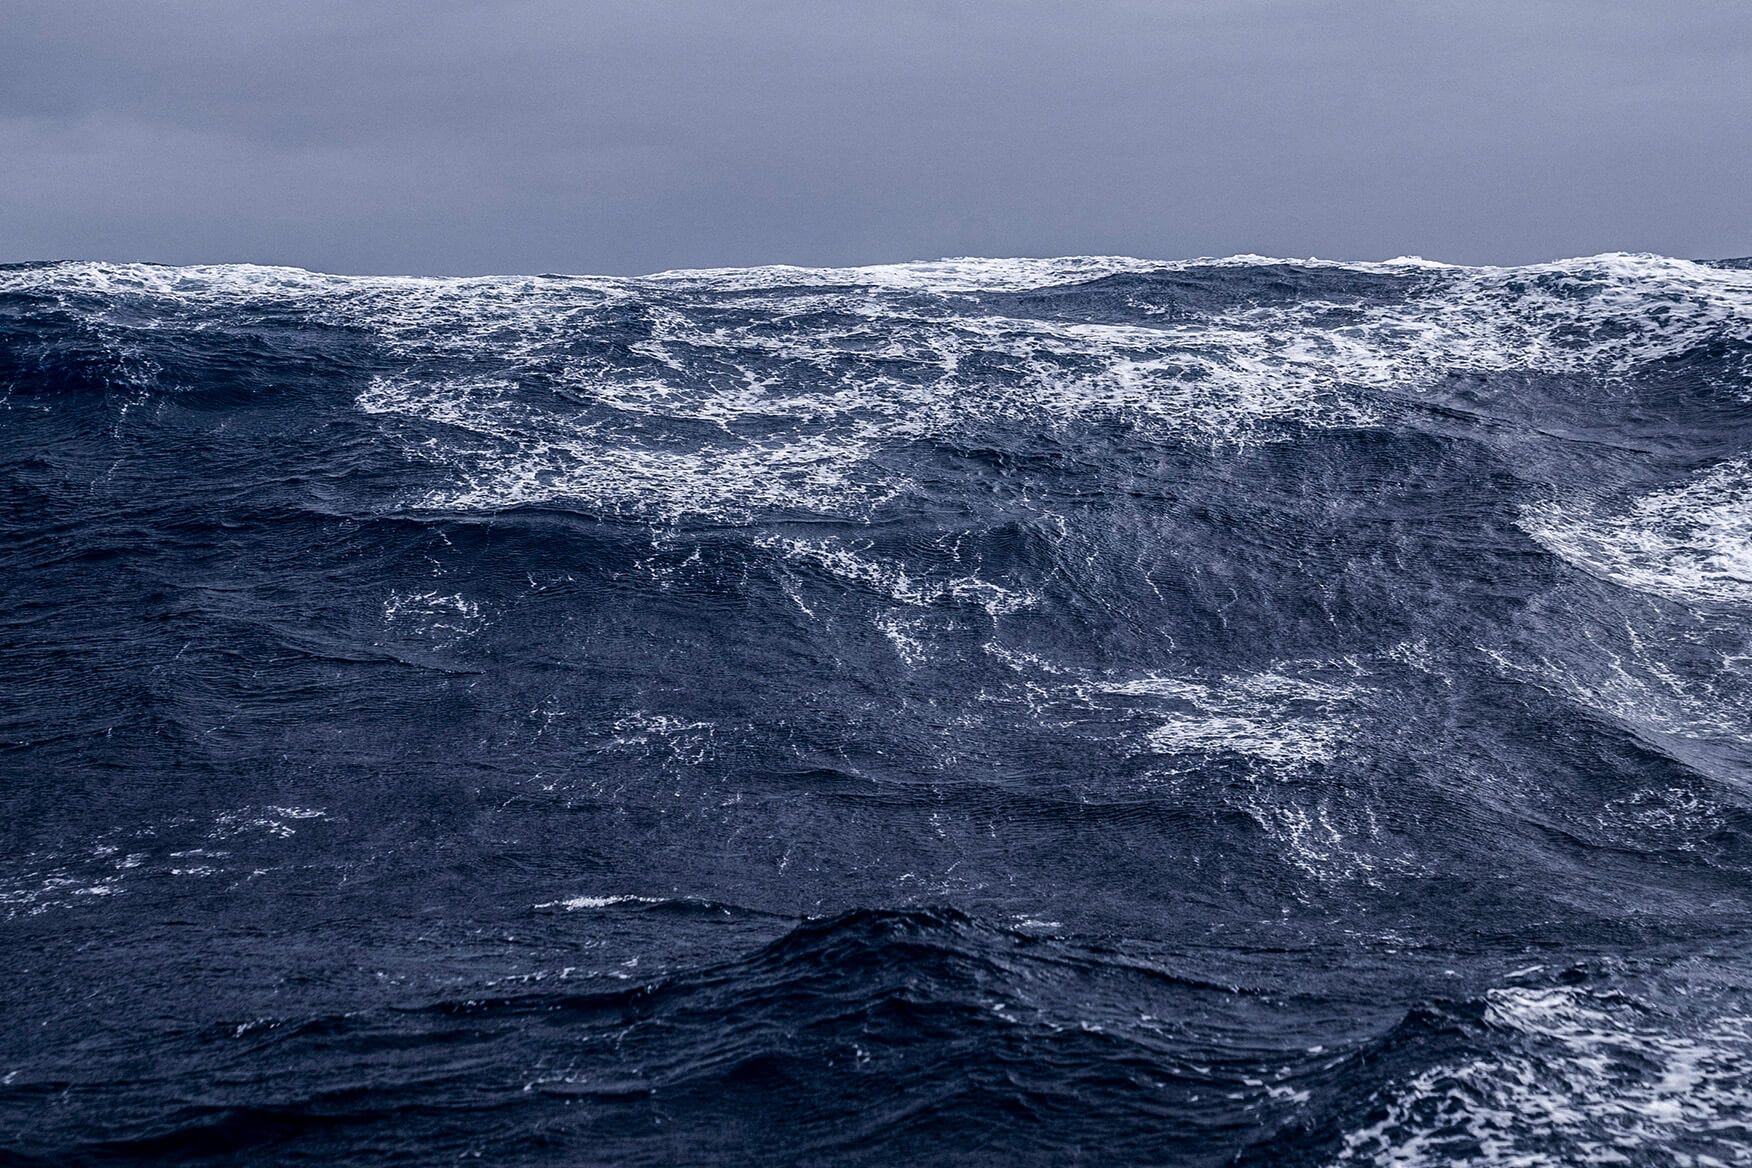 A Southern Ocean wave